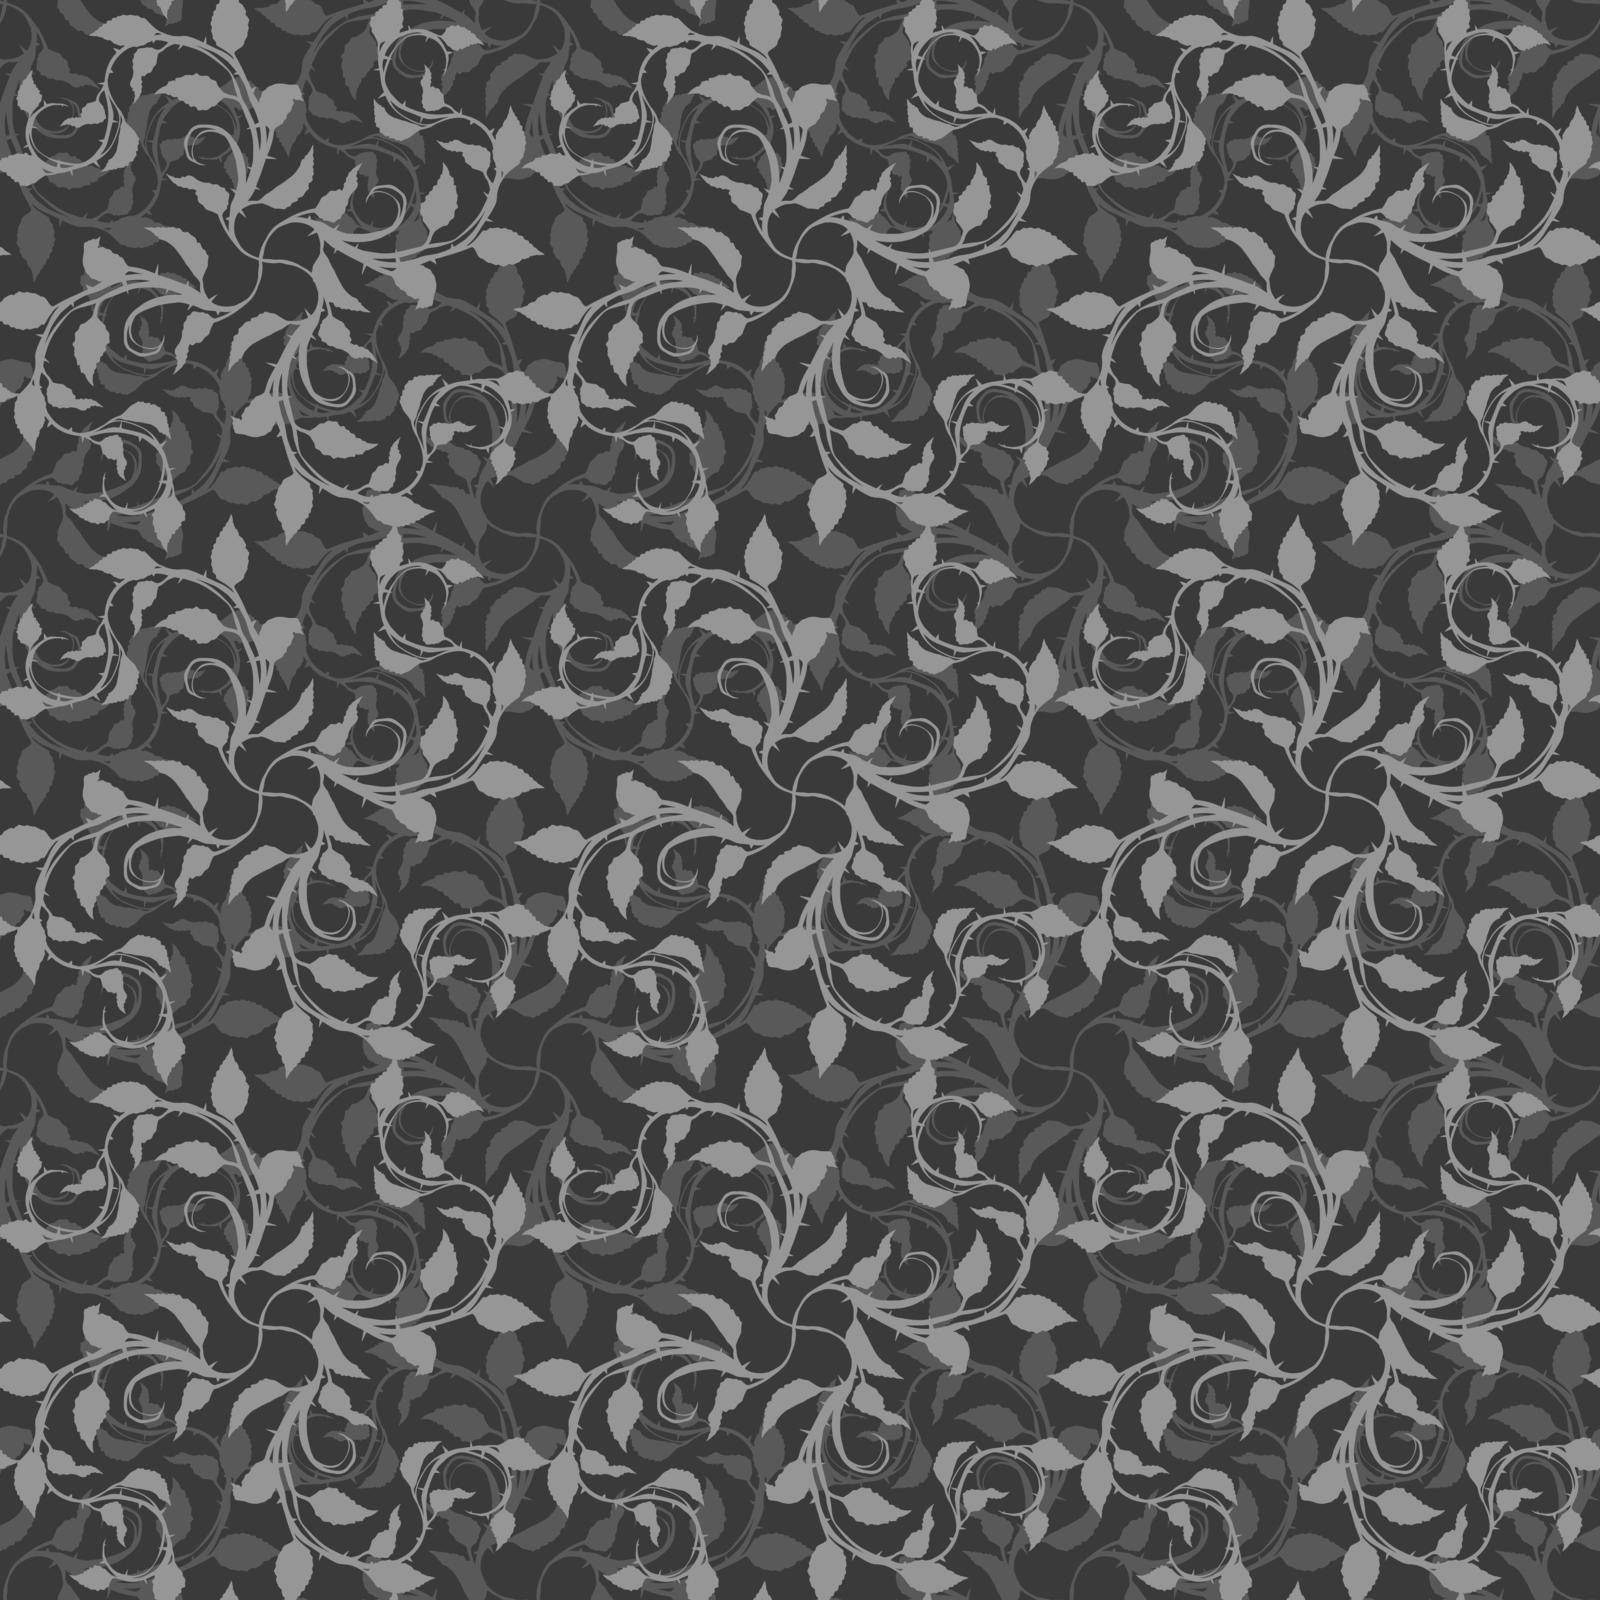 Graphic realistic detailed gray branch of rose with leaves and thorns. Vector floral ornament seamless pattern.